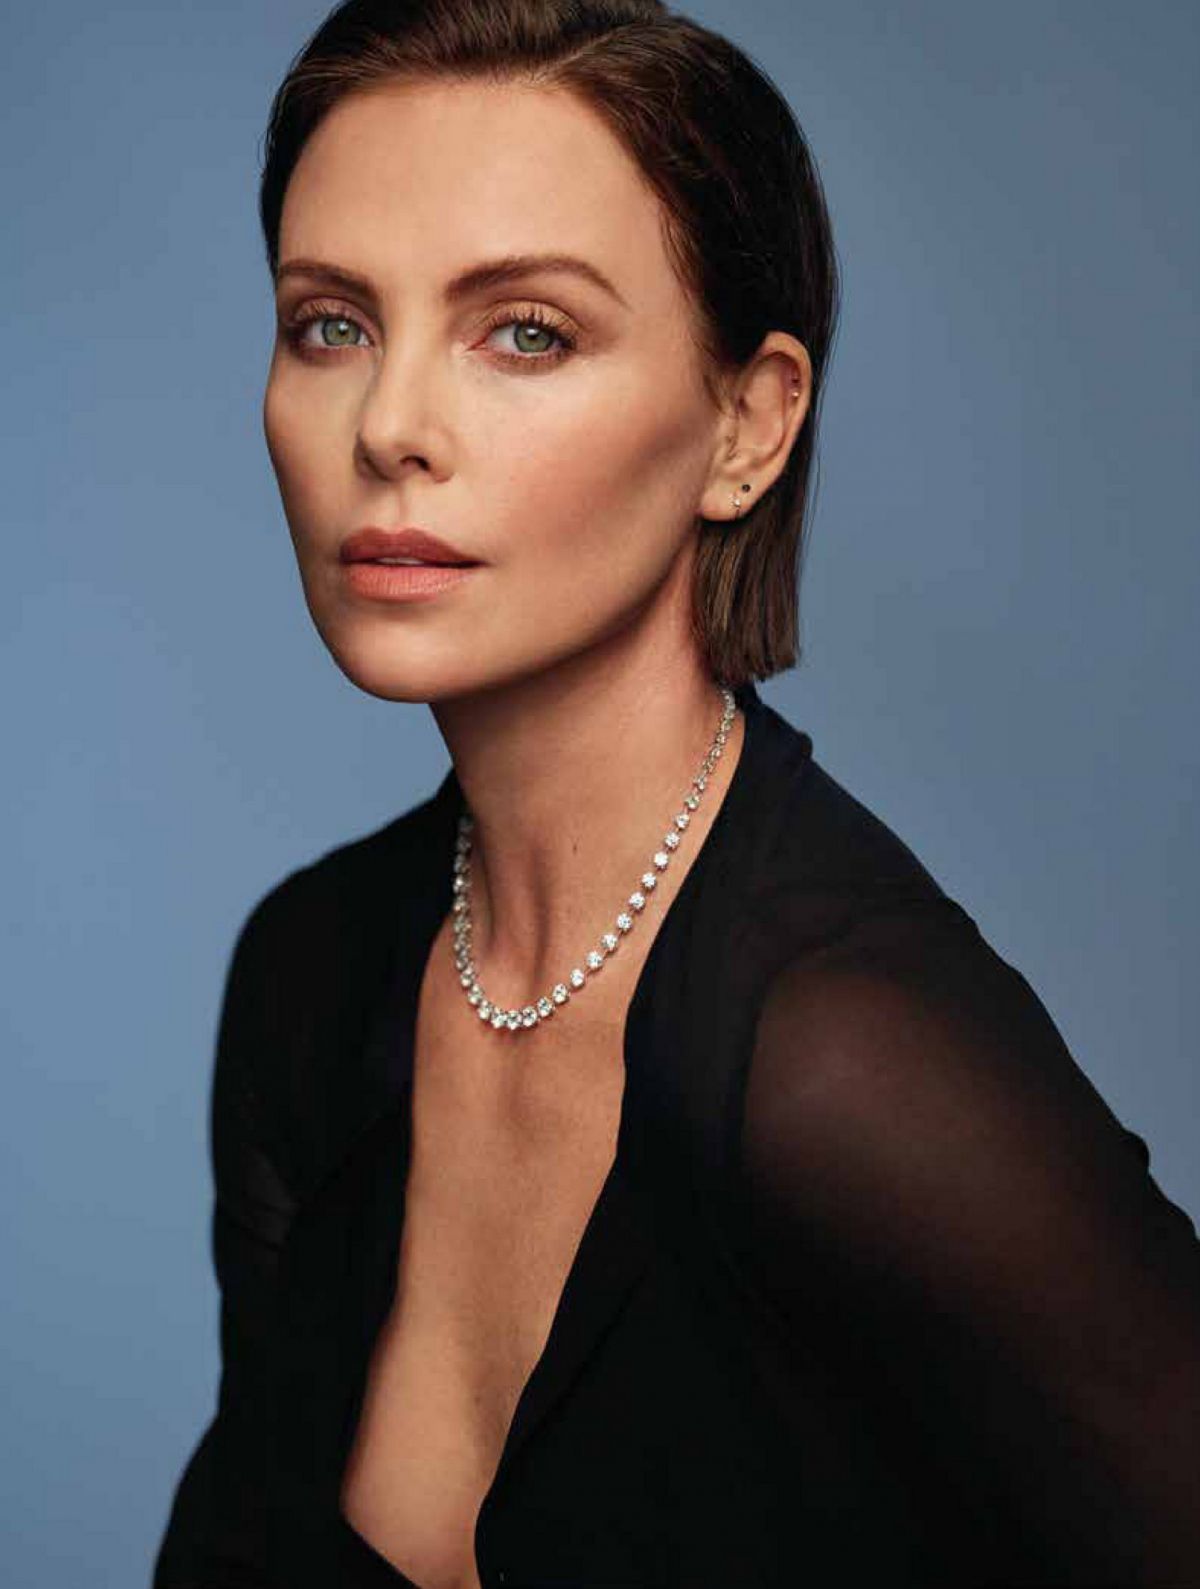 44+ Charlize Theron Images - Asuna Gallery